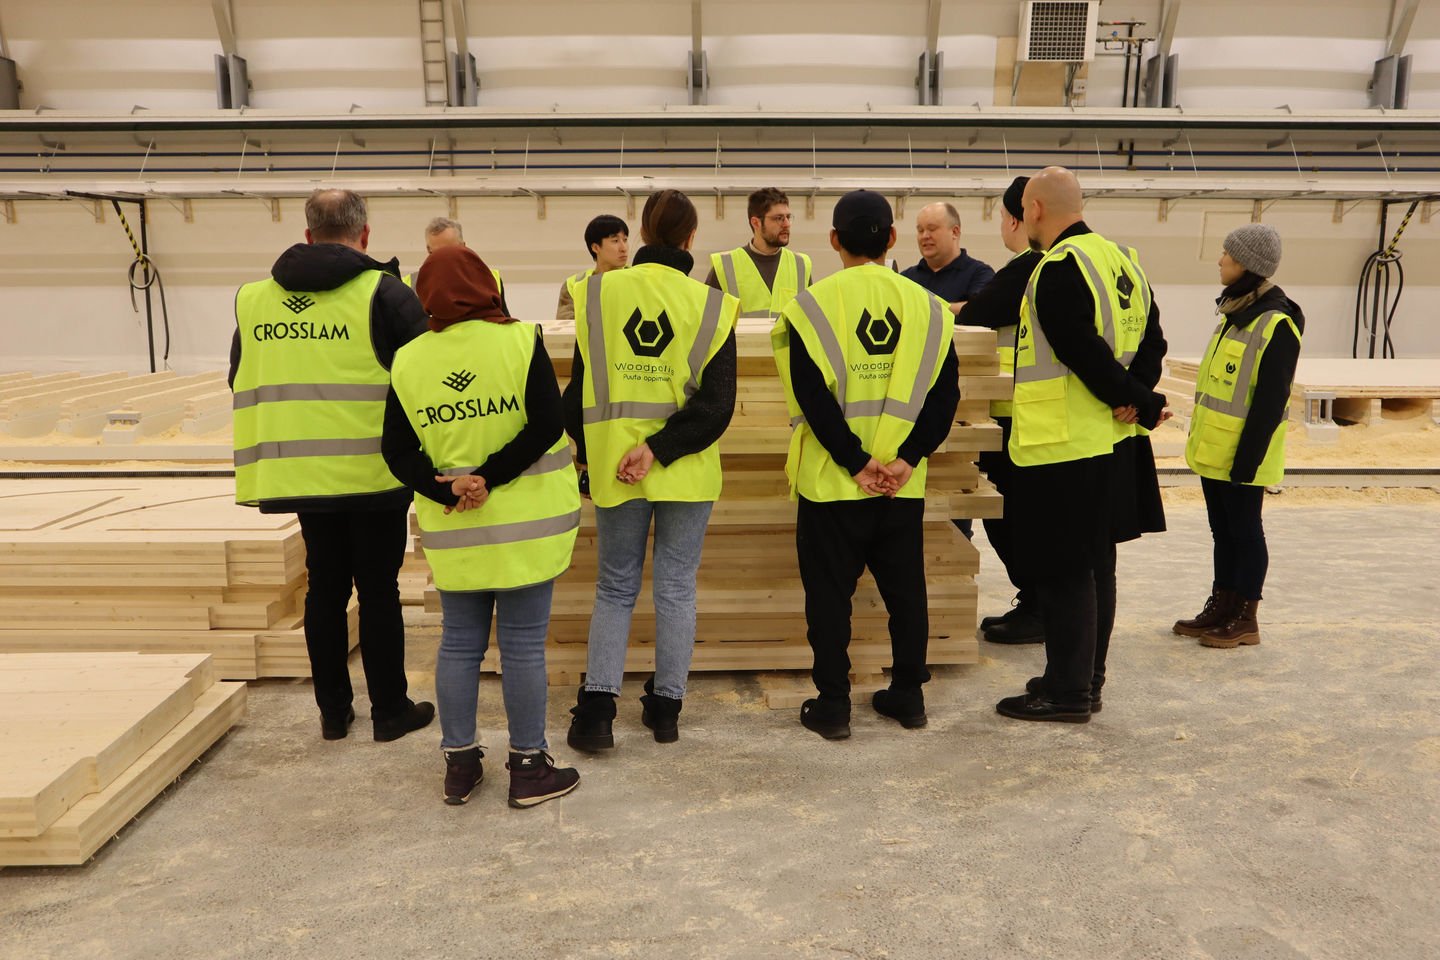 Students standing around a pile of CLT in the Crosslam factory hall